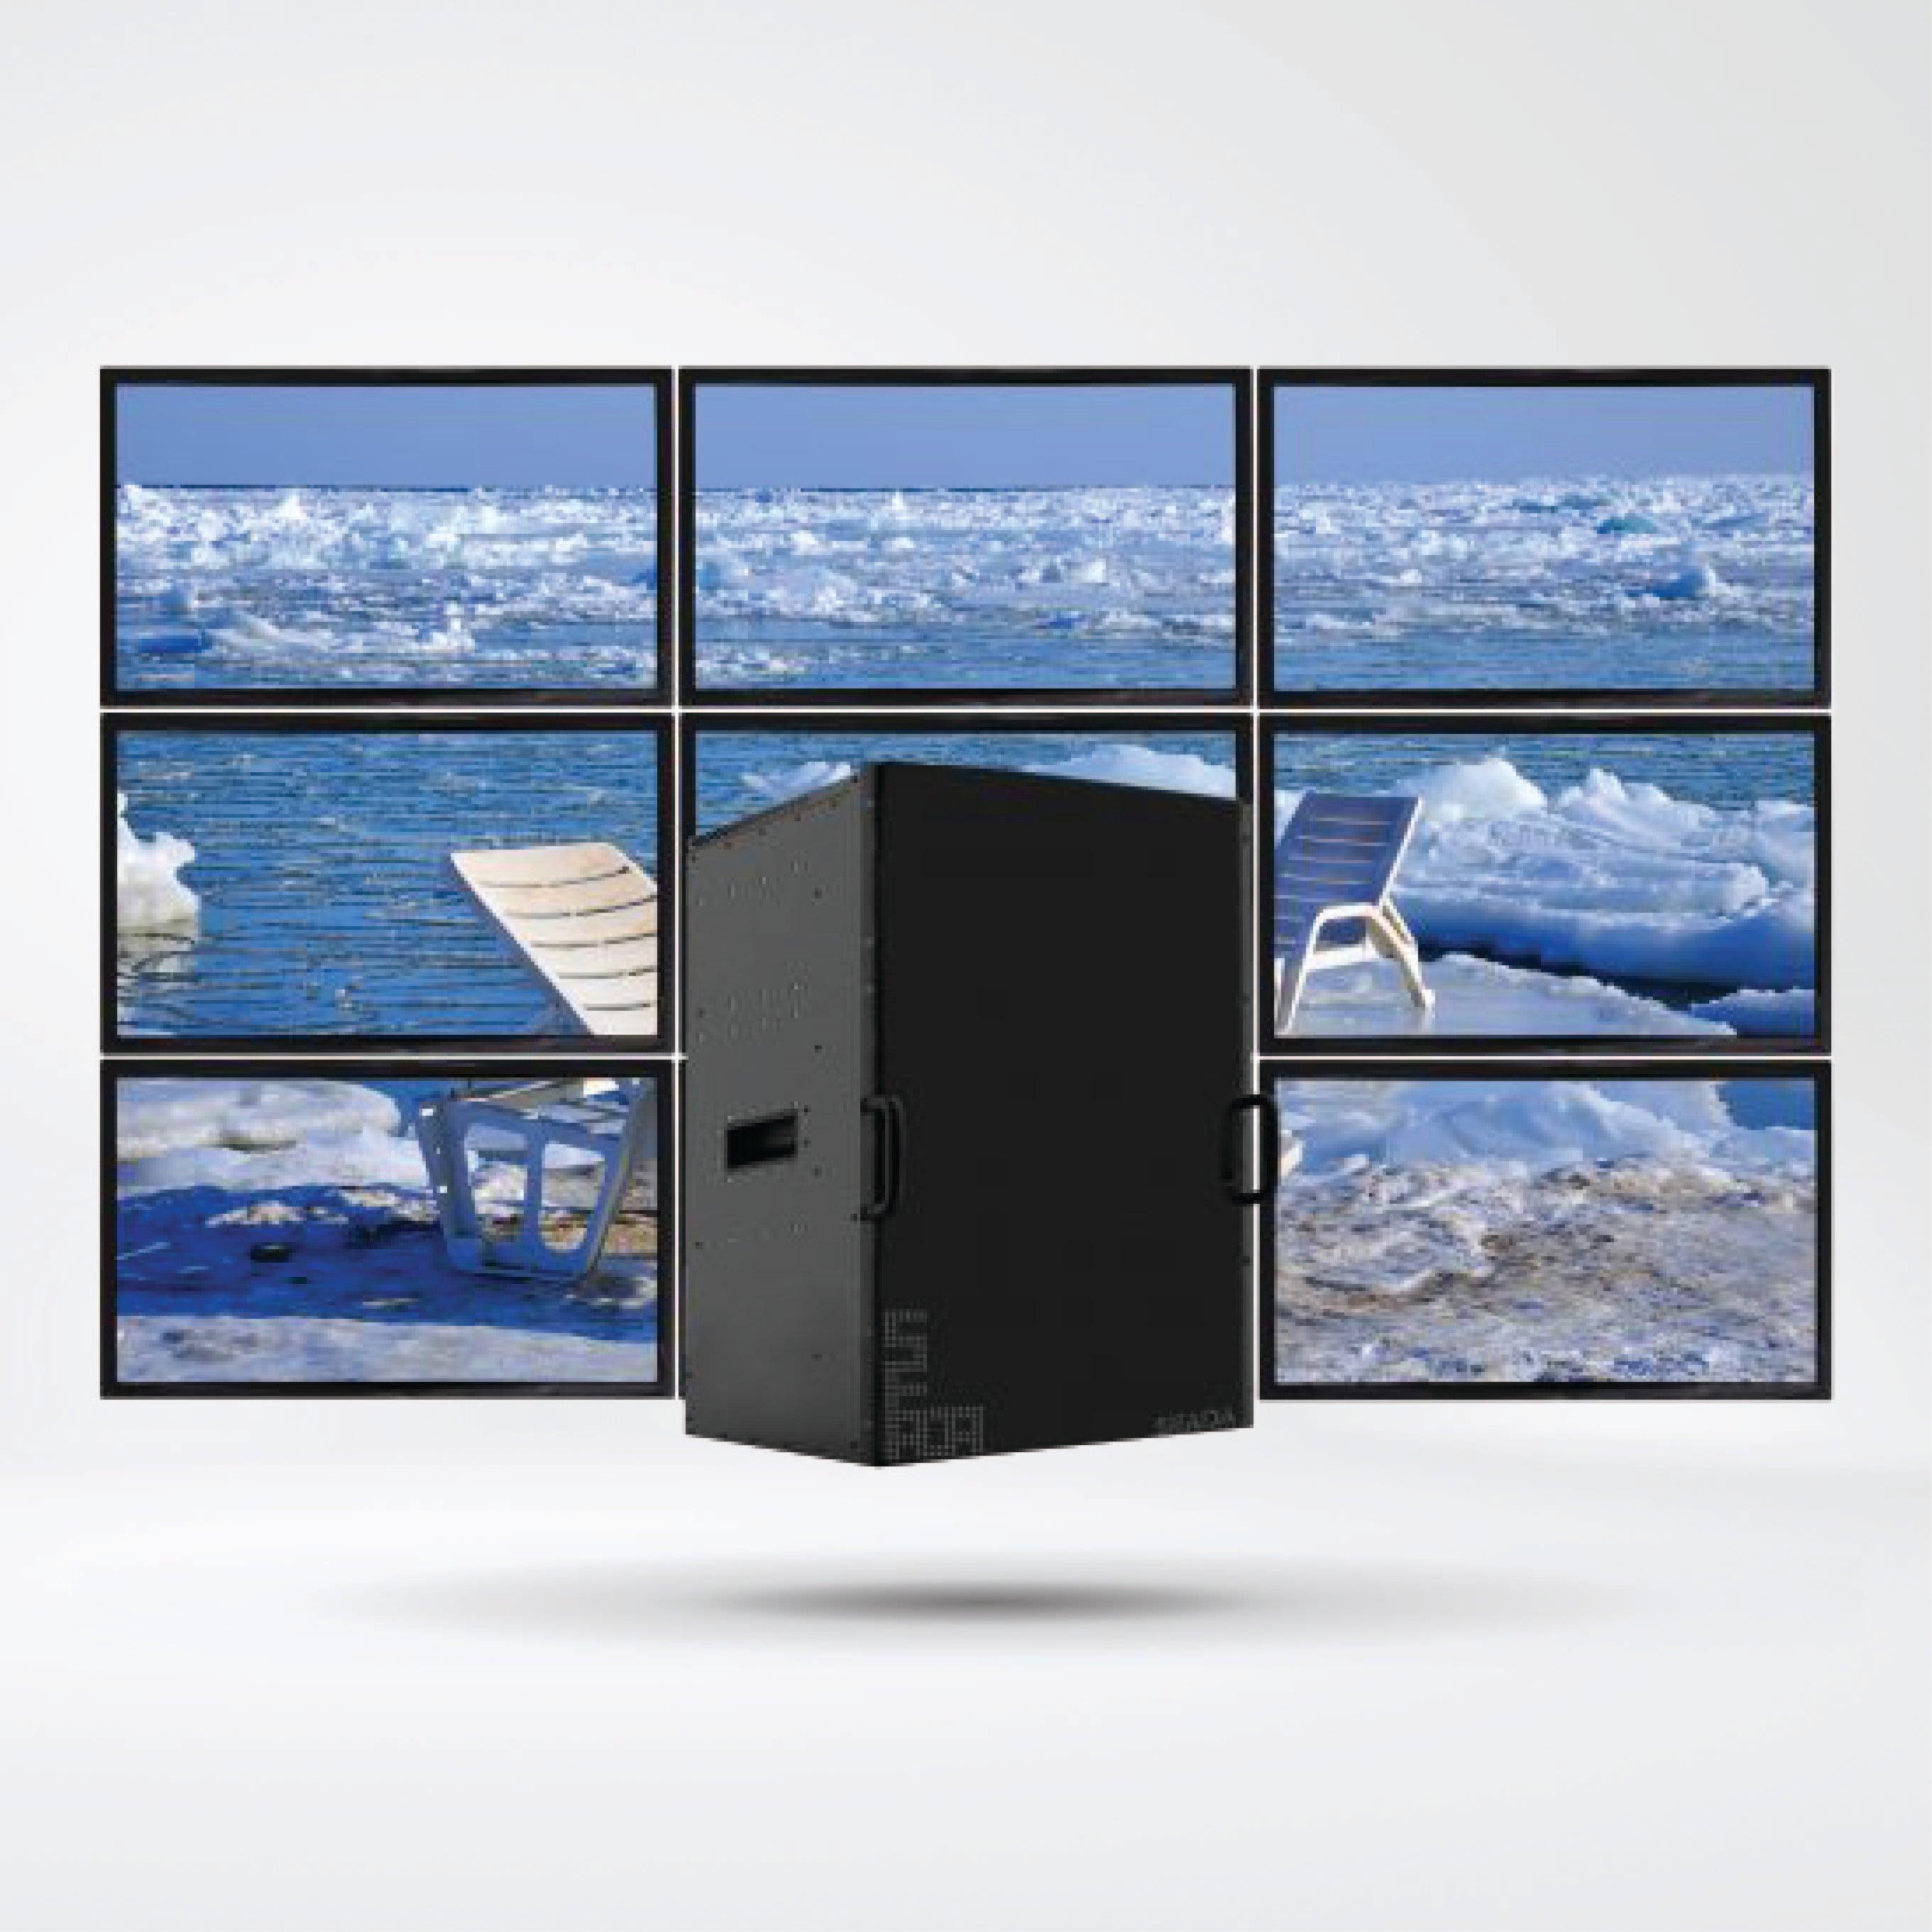 SW8018 Support maximum 18 4K displays, Medium to large size video wall projects - Riverplus